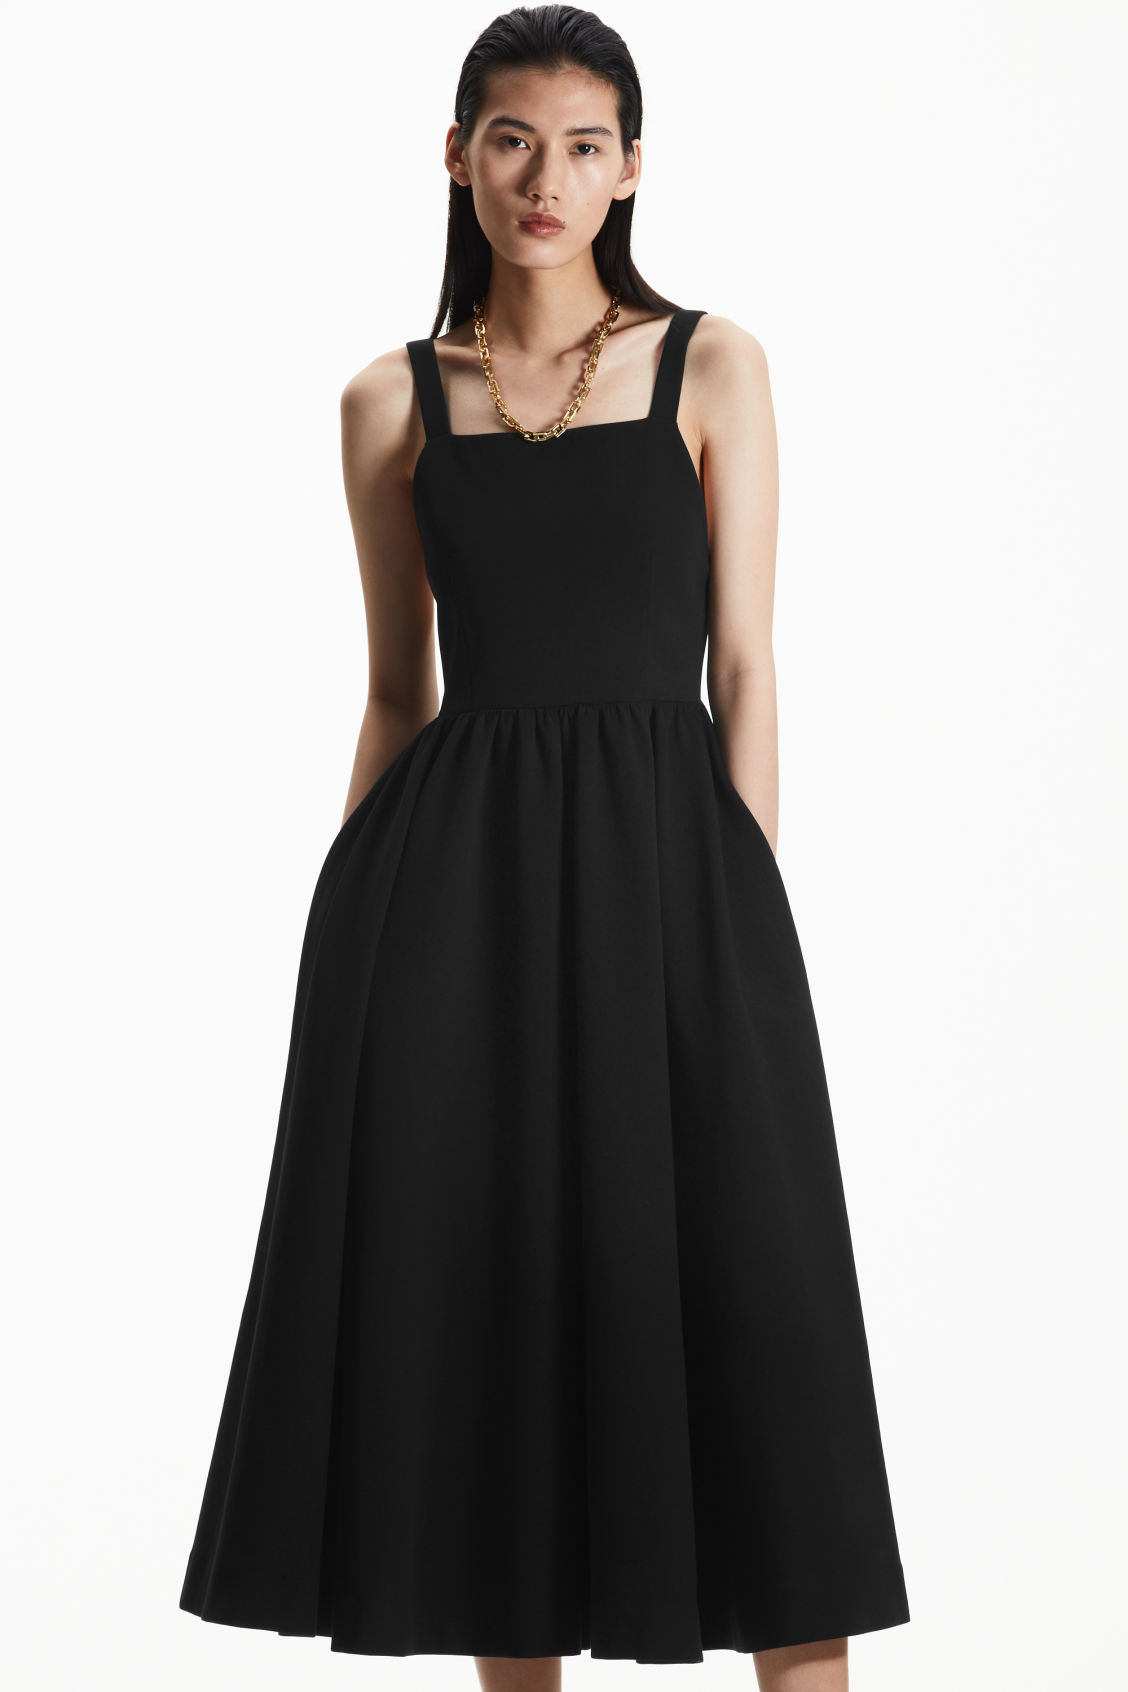 Crafted from a comfortable cotton-blend, this elegant mid-length dress features a square neck, deep open back and full gathered skirt. The front darts, concealed zip-fastening  and pockets add the finishing touches to this statement look.